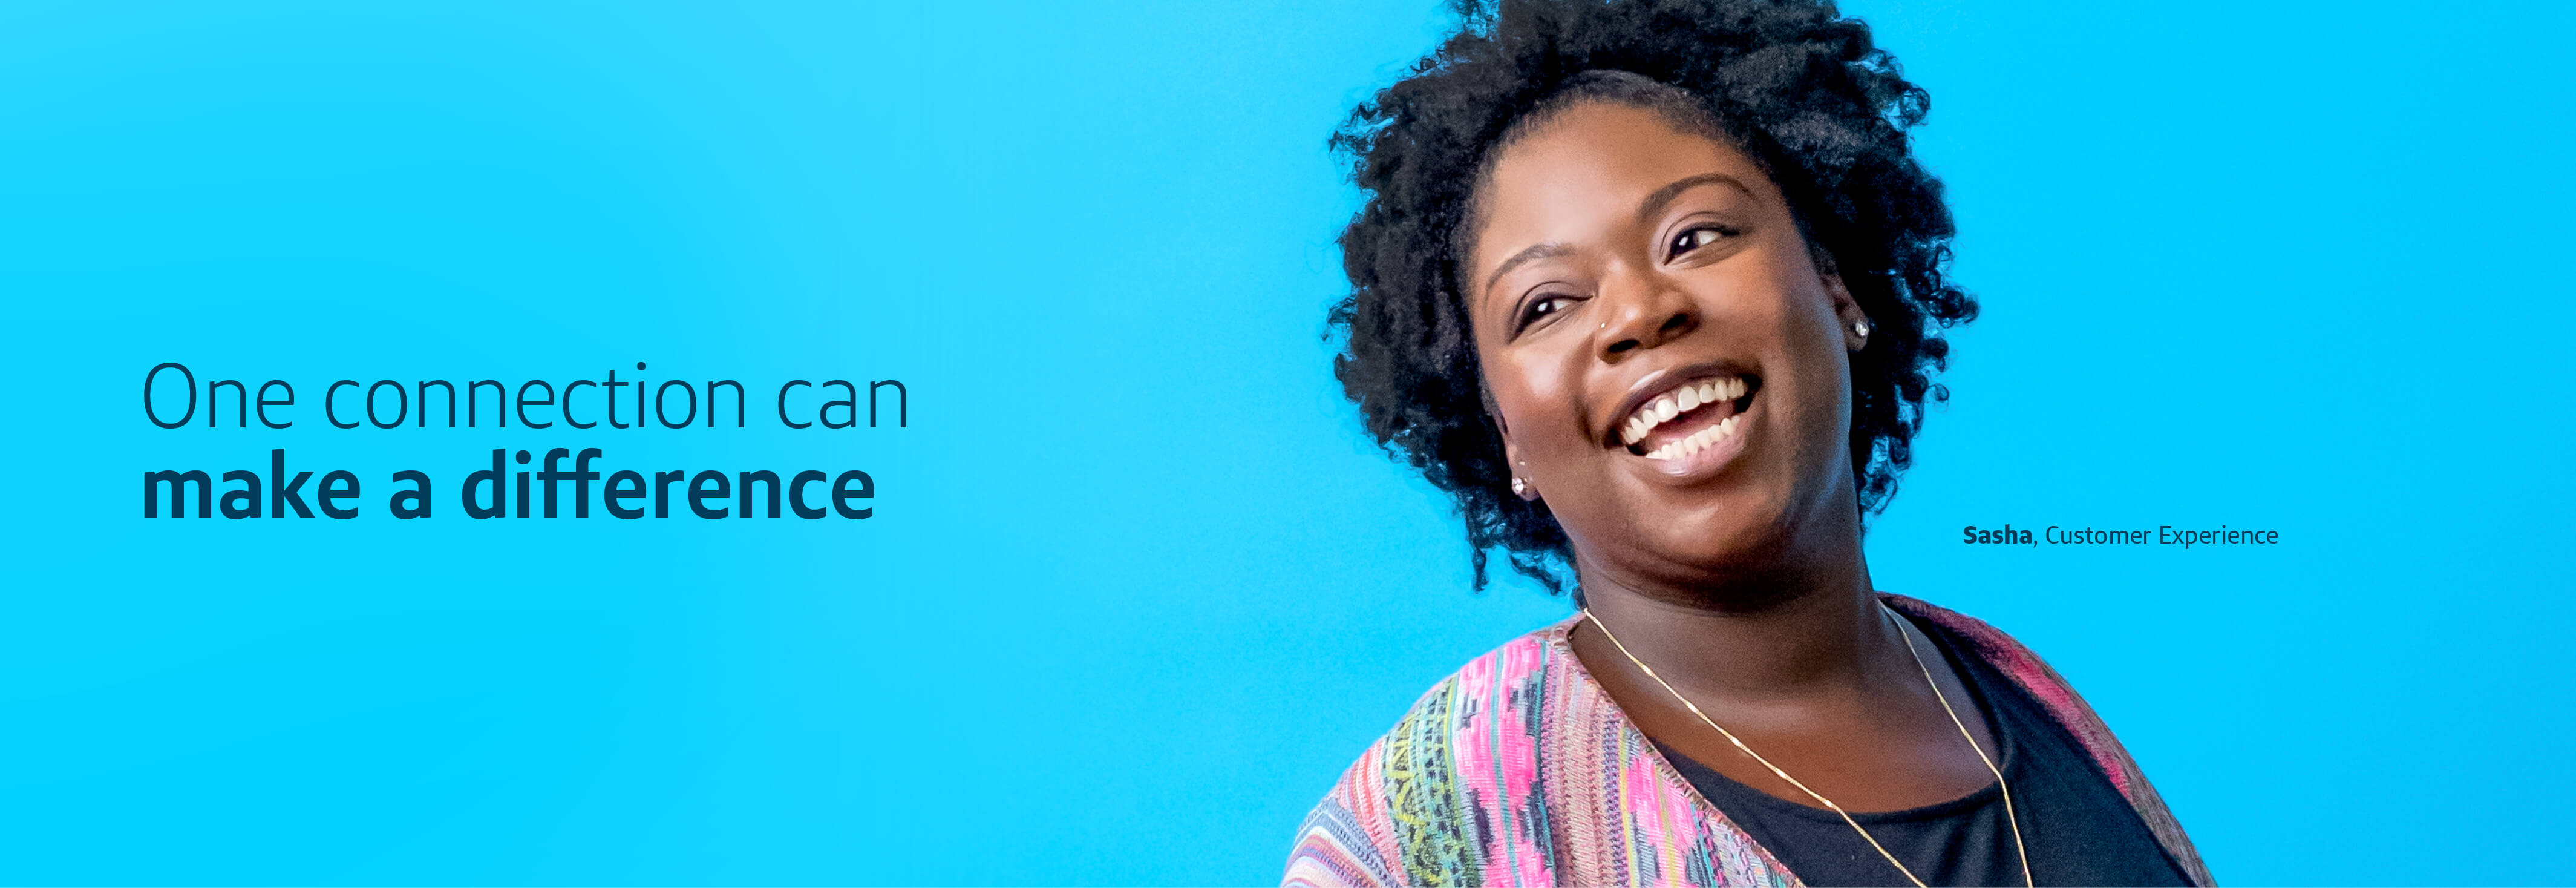 Sasha, a Capital One Customer Experience associate, stands in front of a blue background smiling next to a quote that says, "One connection can make a difference"